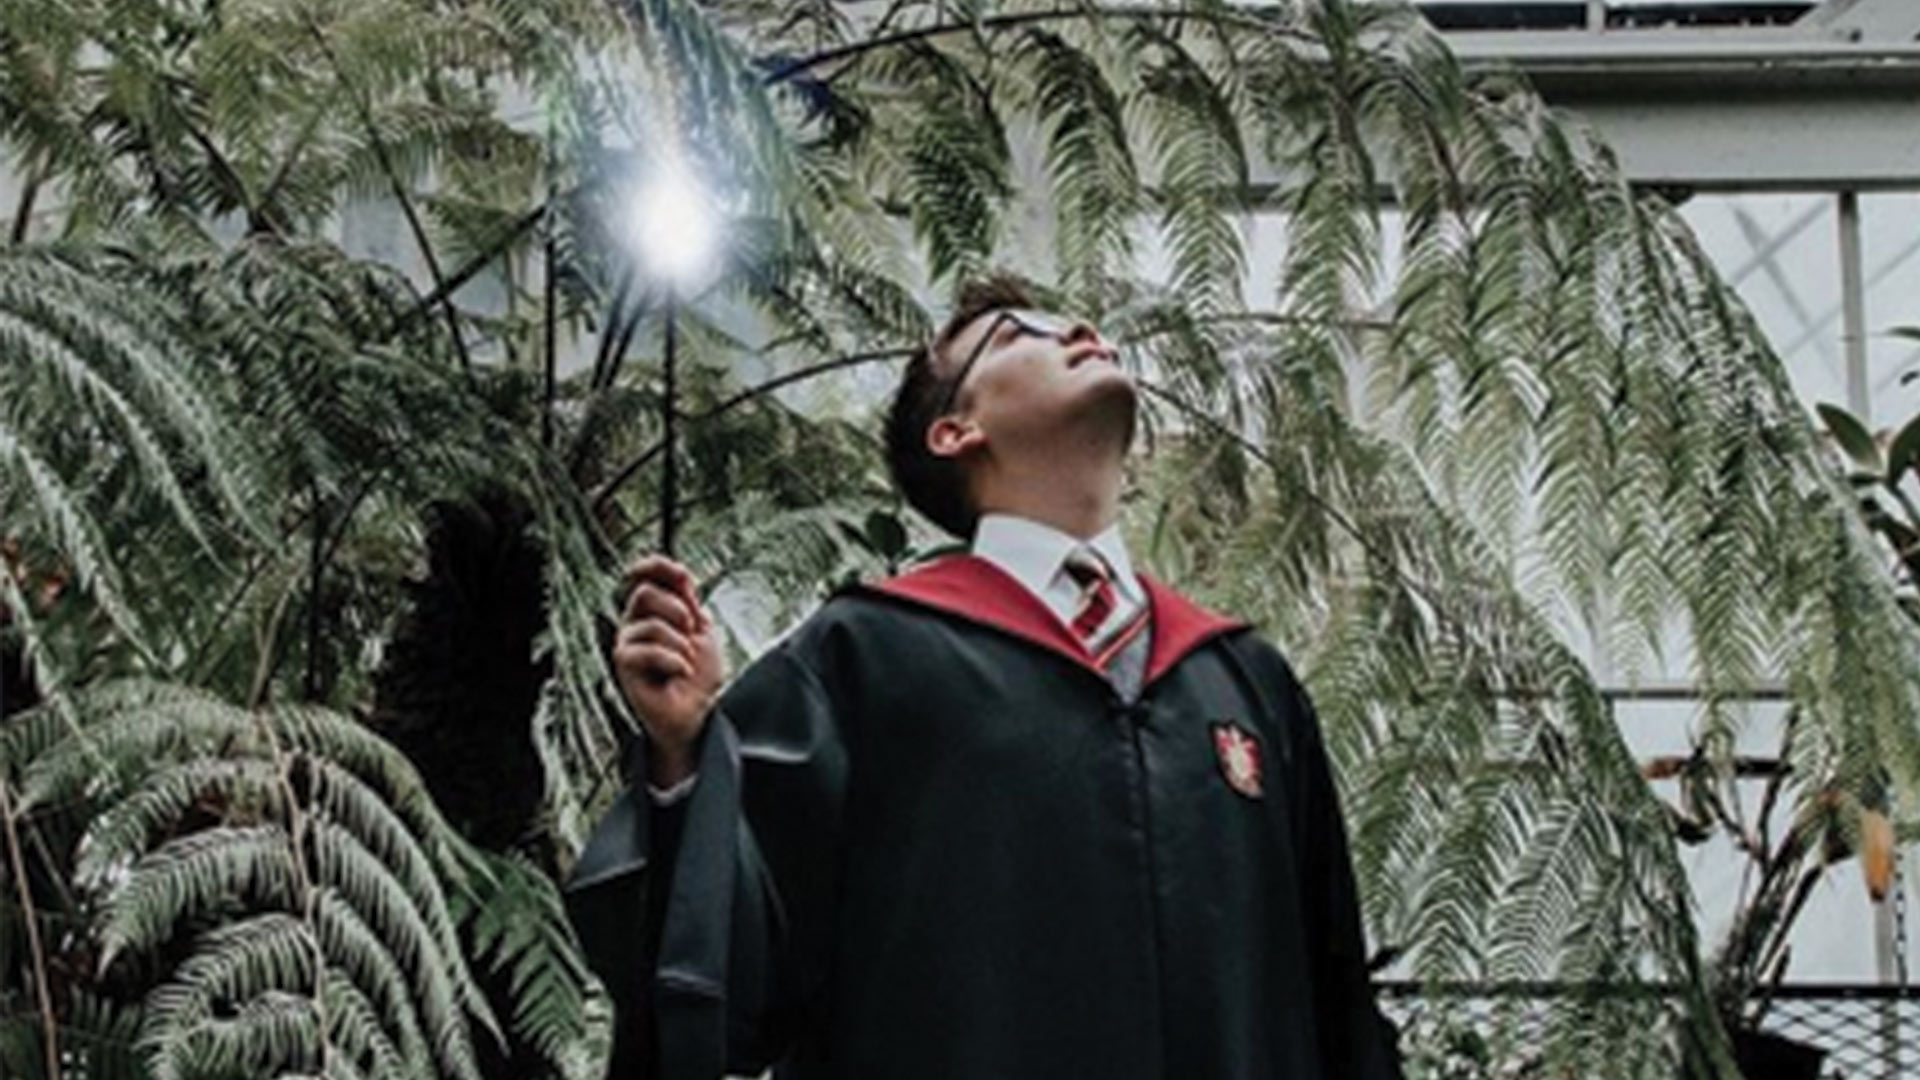 a student stands dressed as harry potter holding a wand in a greenhouse